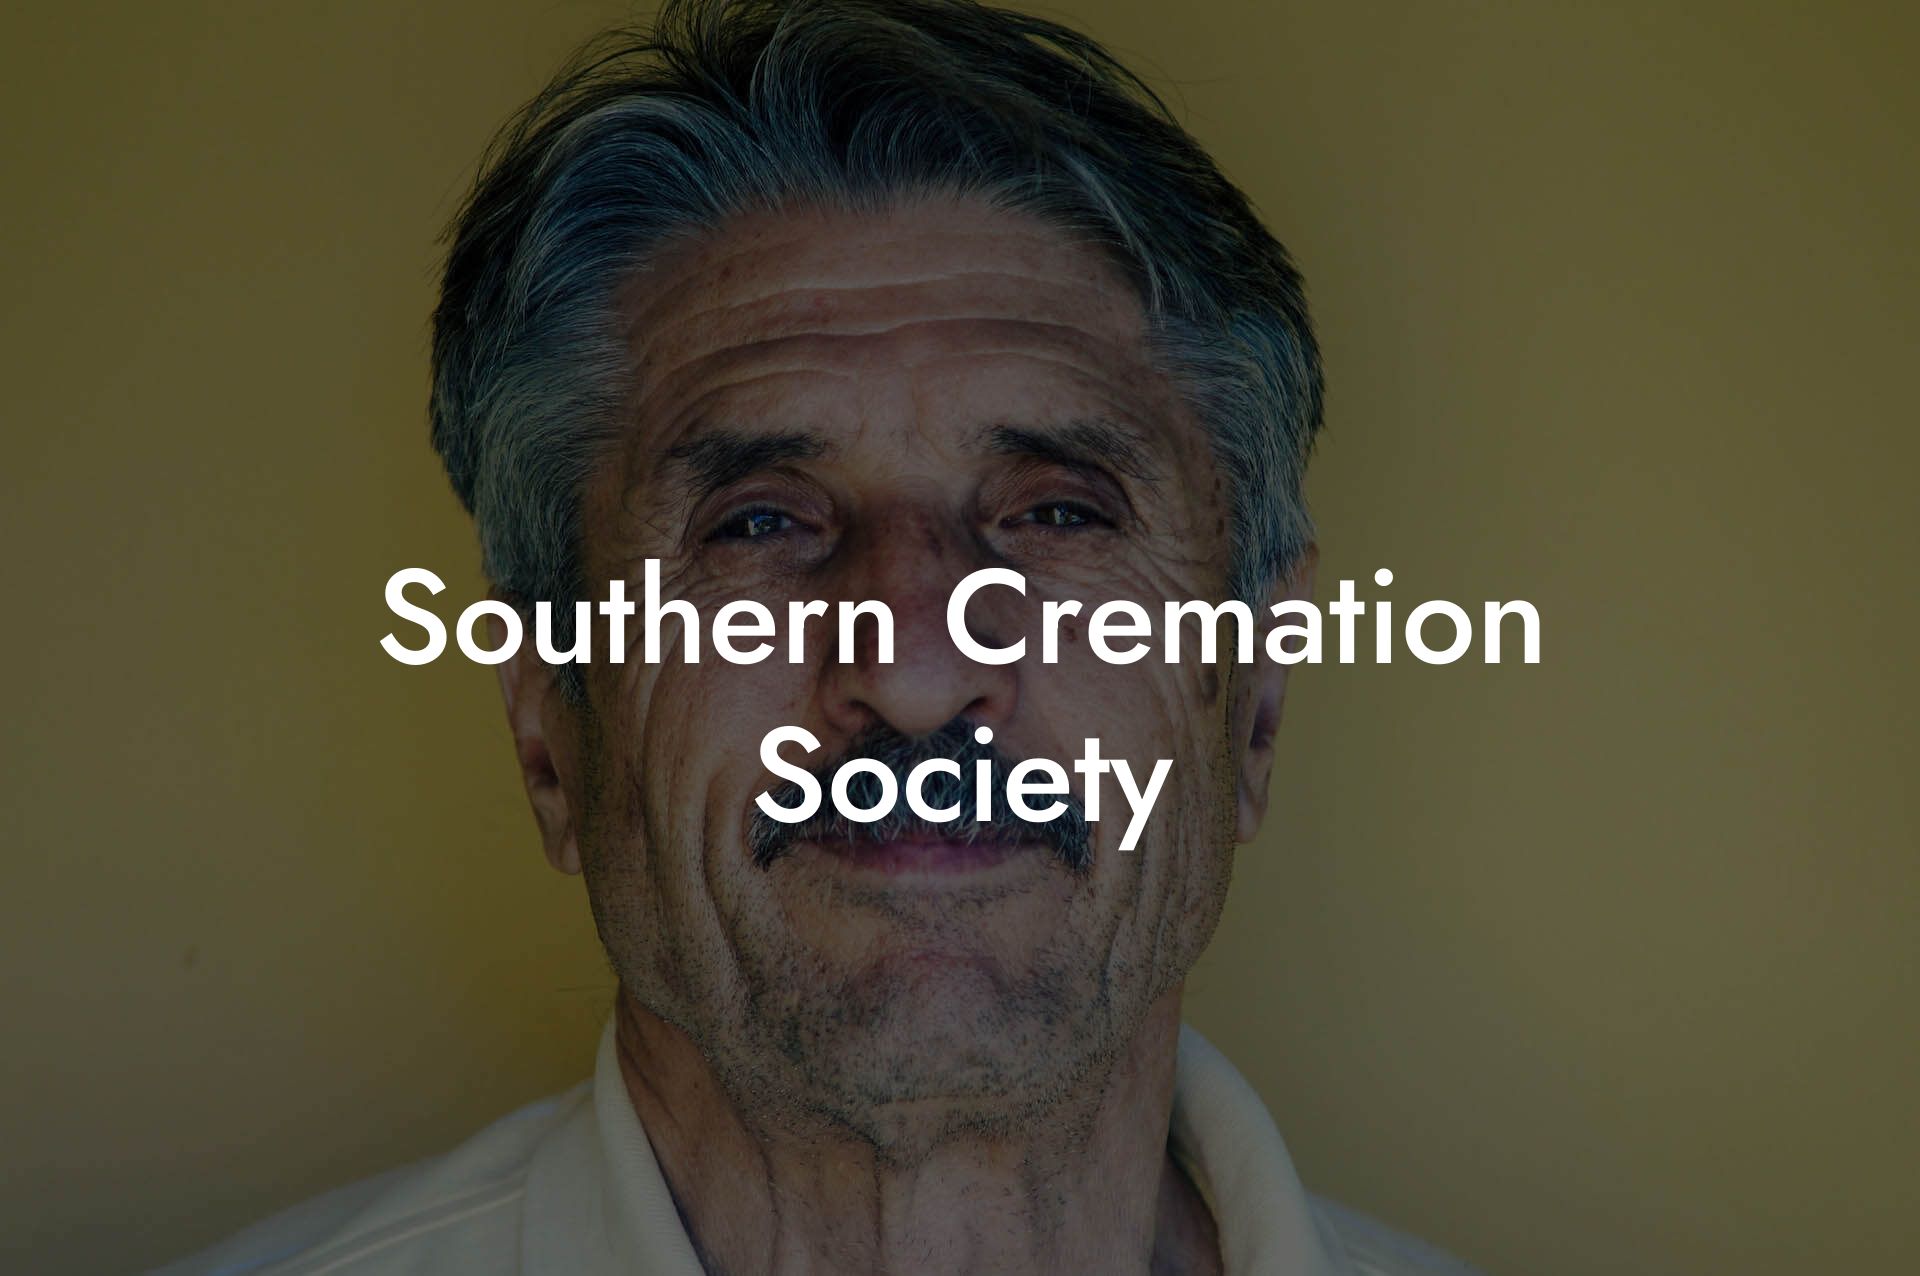 Southern Cremation Society